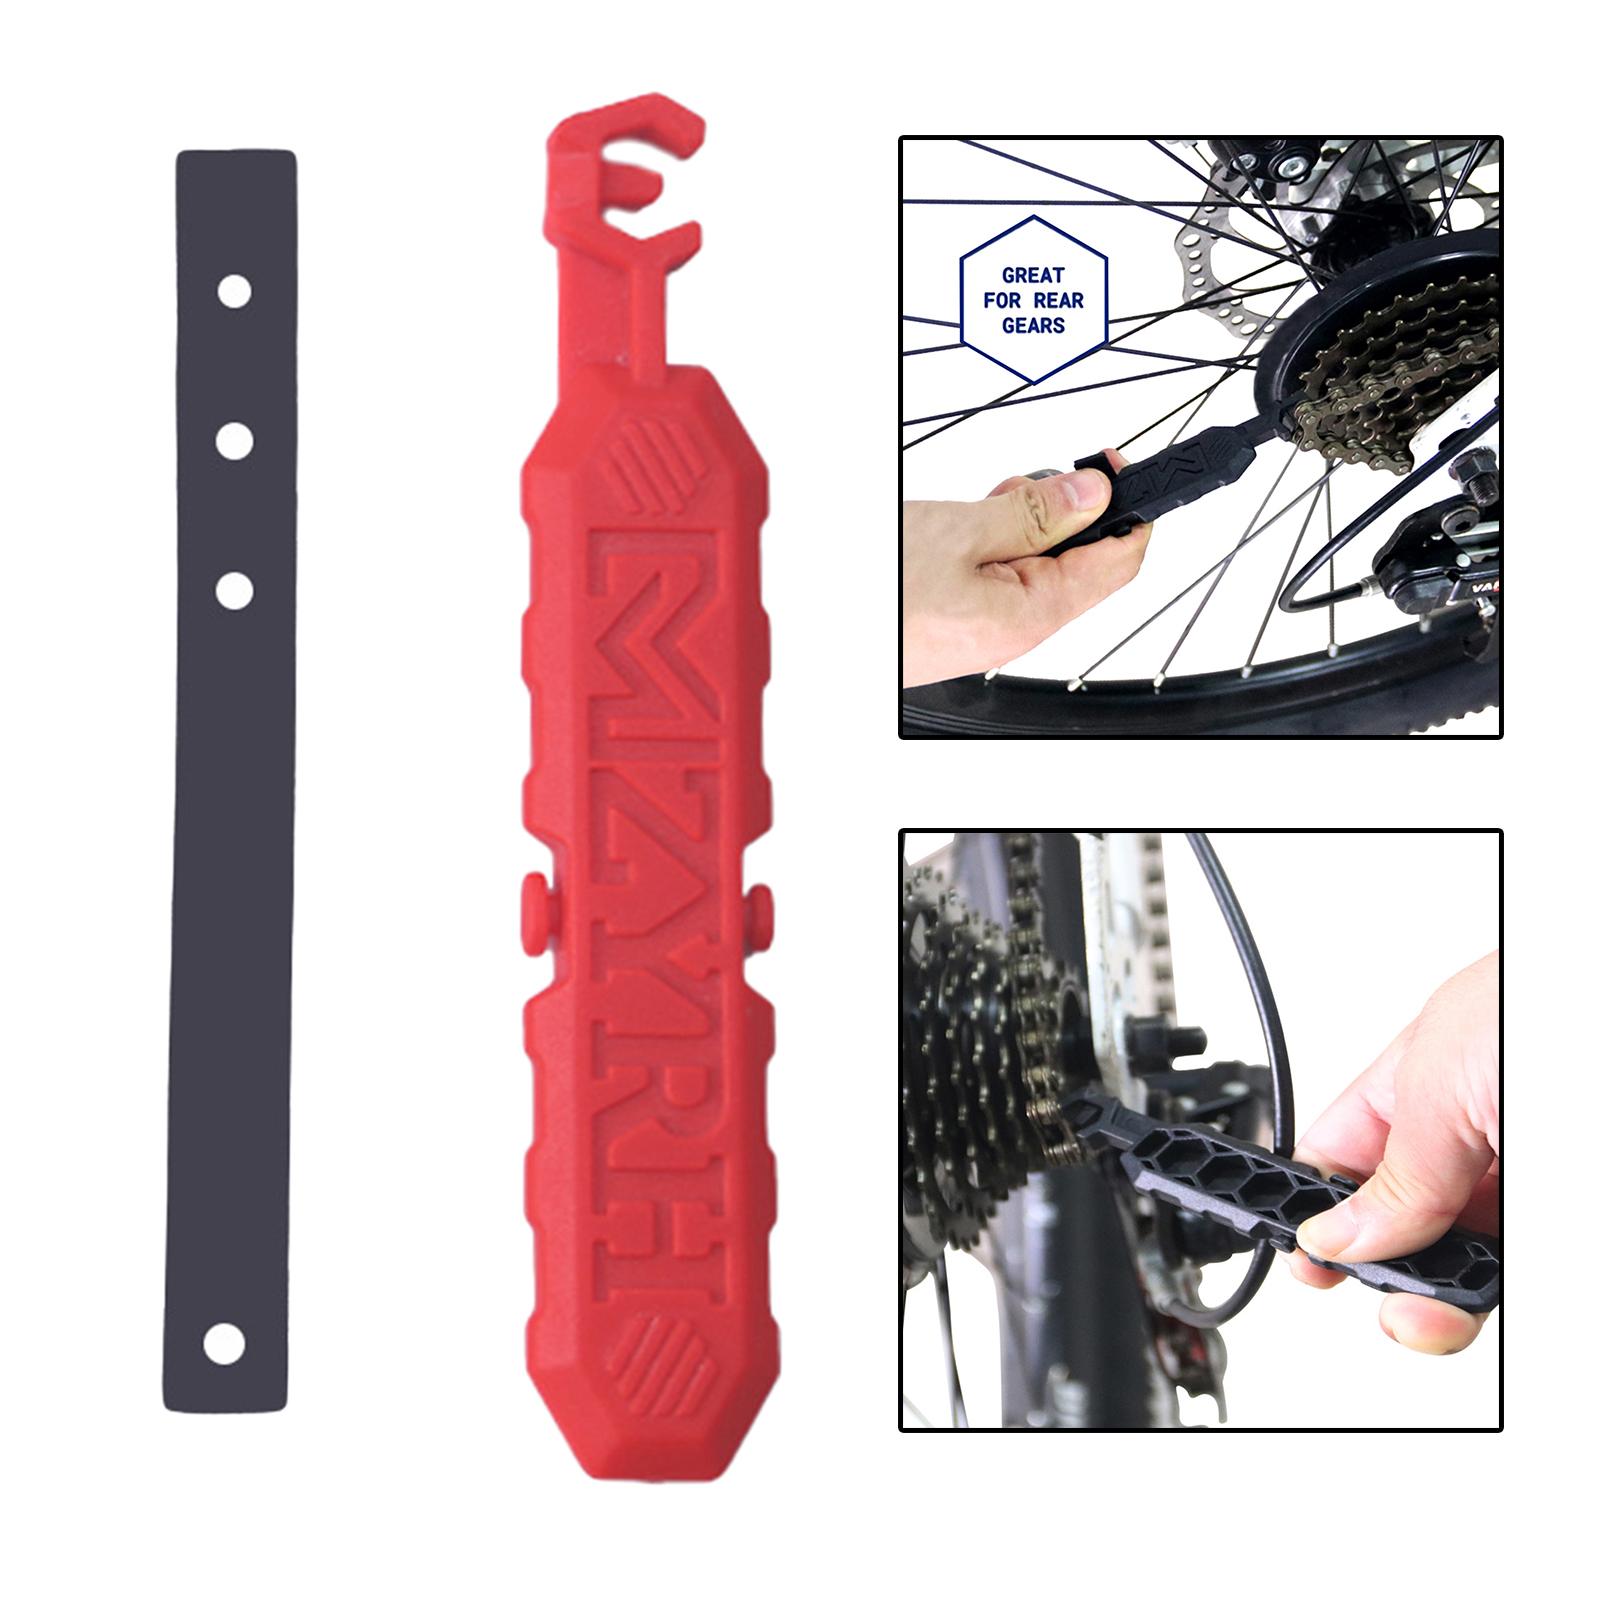 Chain Installer Road Bike Adjust Repair Tool Bicycle for Cycling  Red